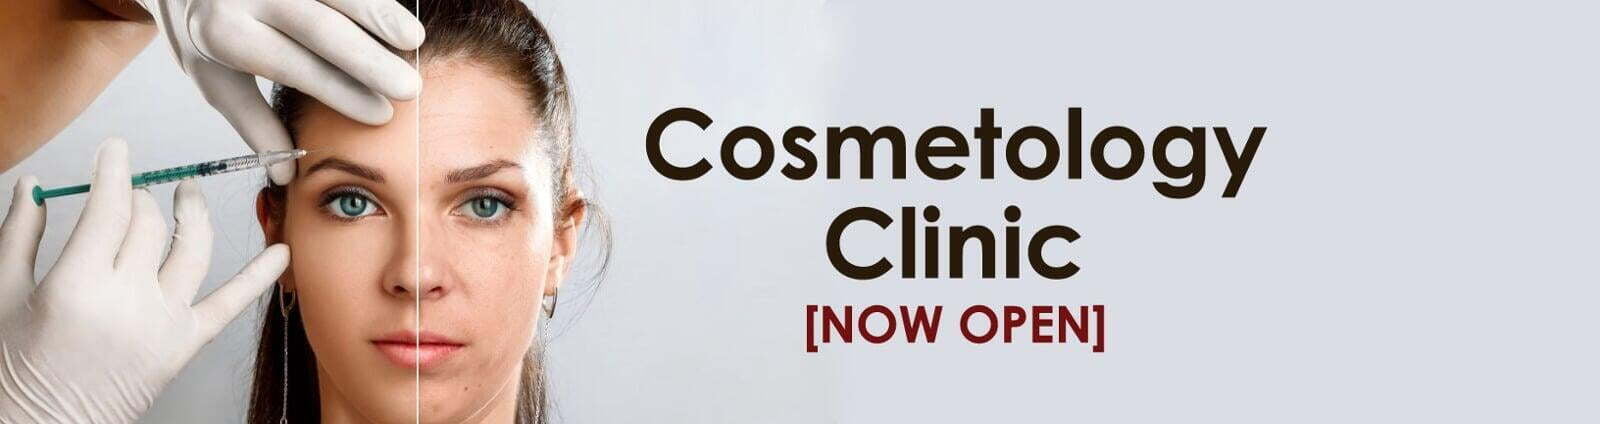 Looking for Safe Cosmetic Treatments?